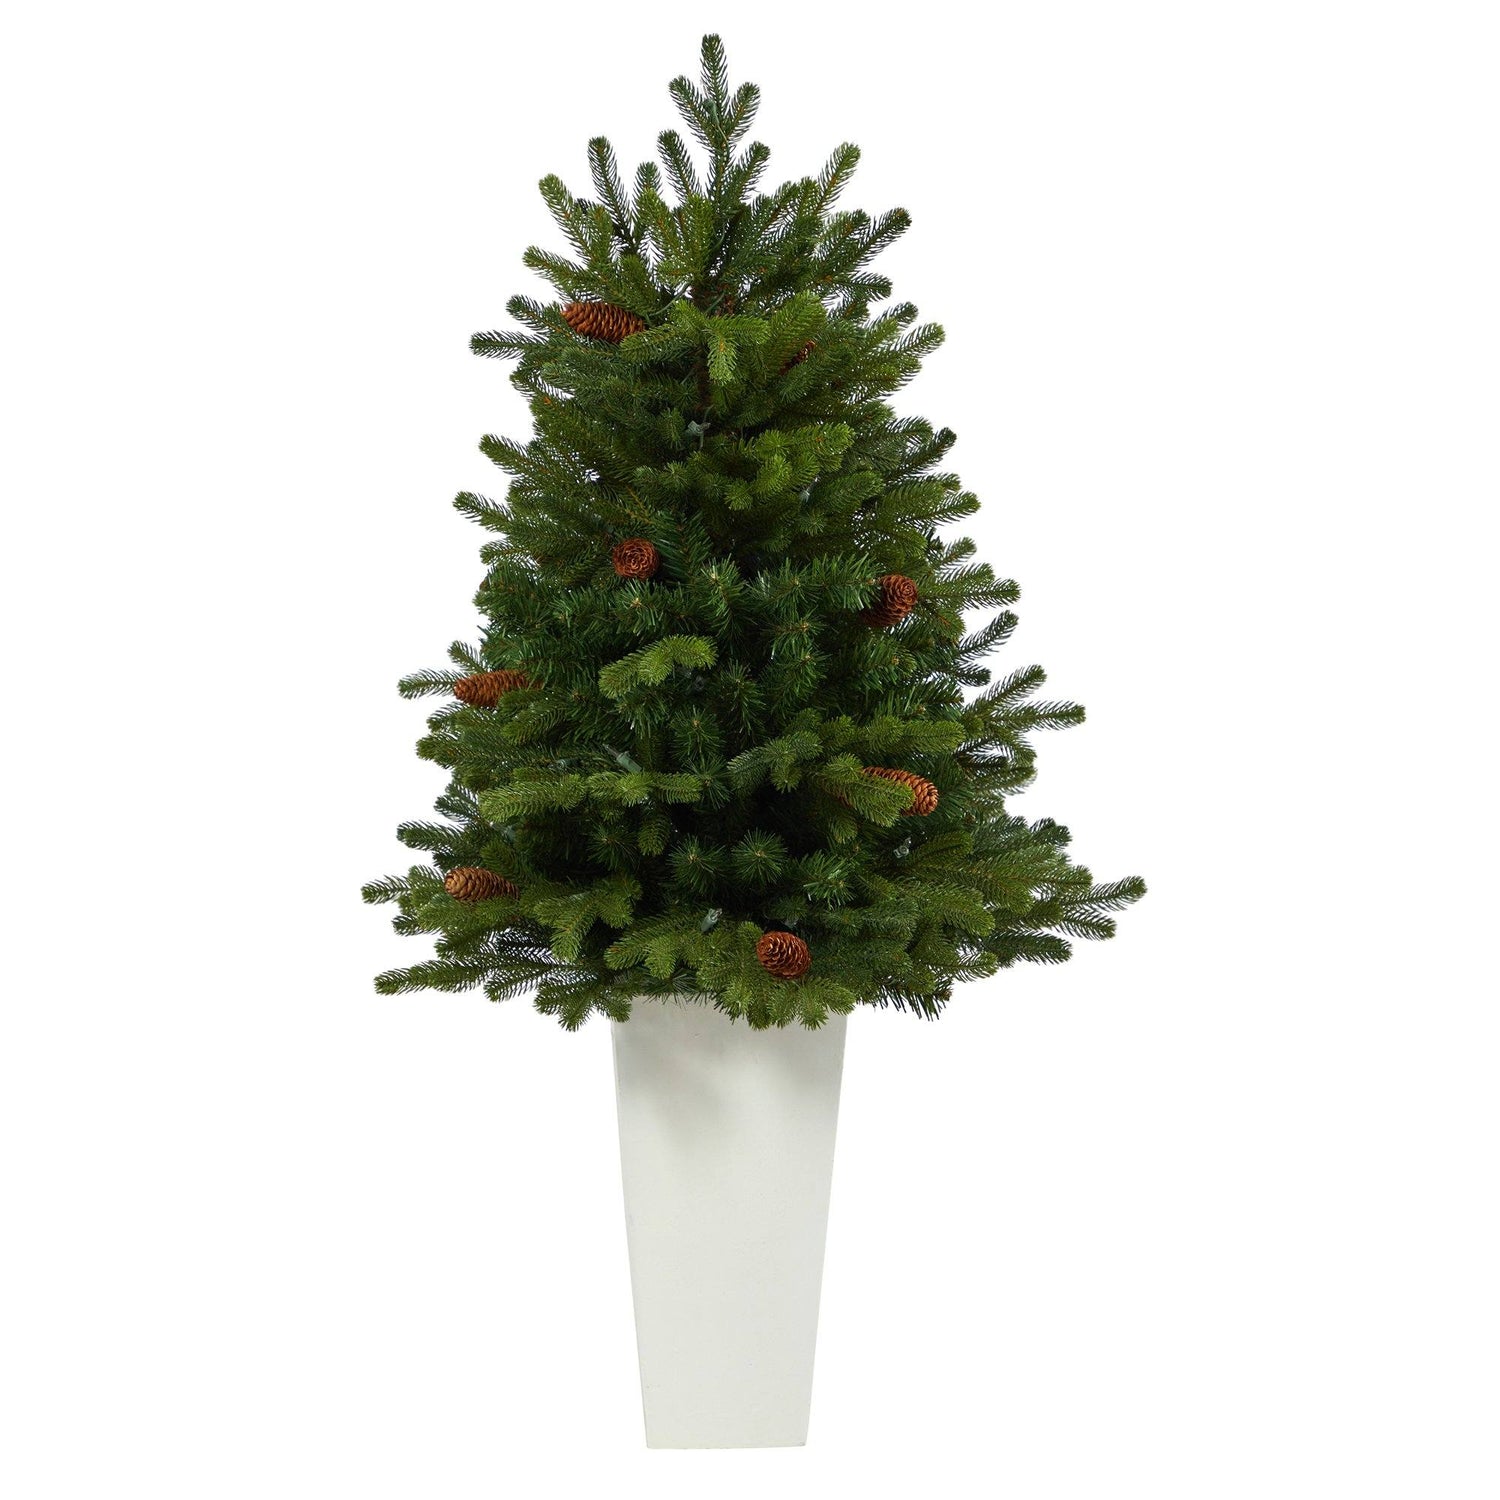 3.5’ Yukon Mountain Fir Artificial Christmas Tree with 50 Clear Lights and Pine Cones in White Planter